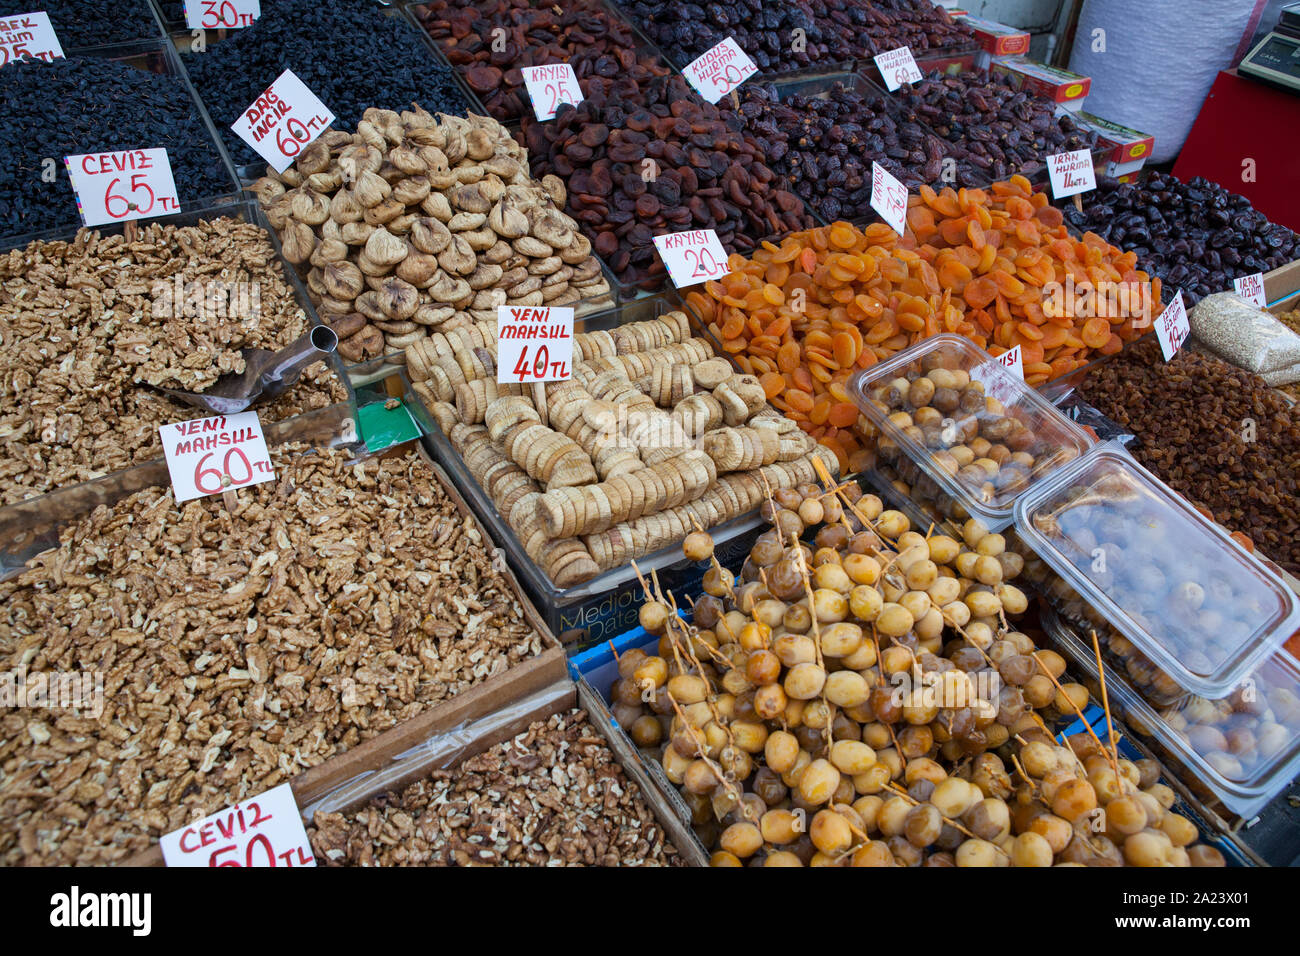 Display of nuts and dried fruit at a market stall in the Fatih district of Istanbu Stock Photo